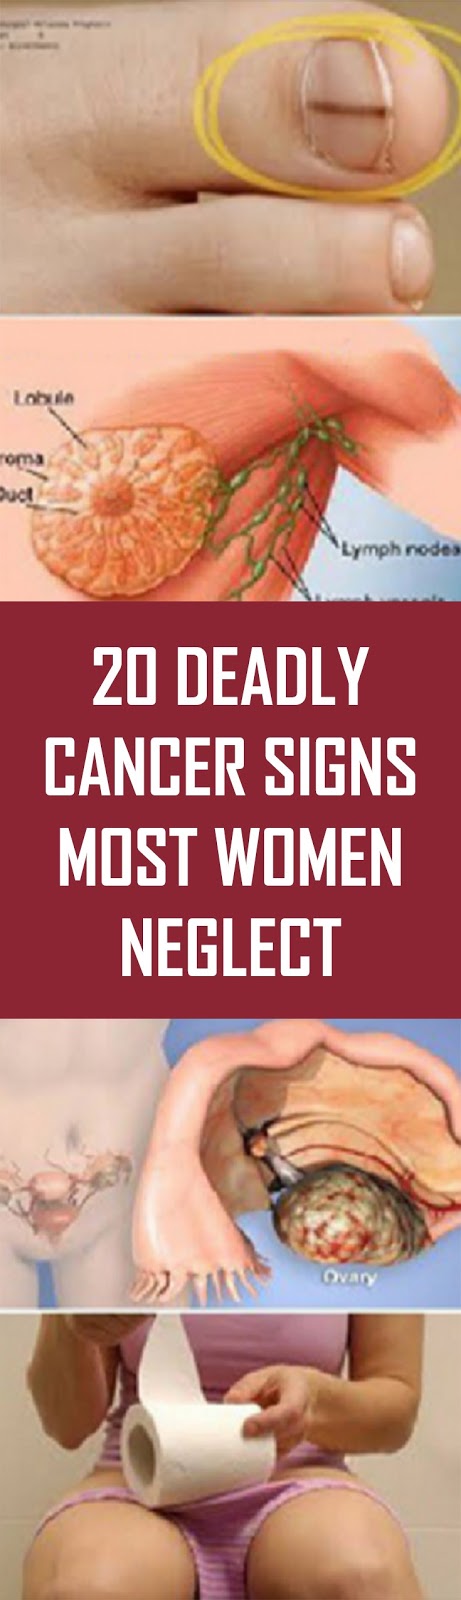 20 Deadly Cancer Signs Most Women Neglect Nutrition Health Tips